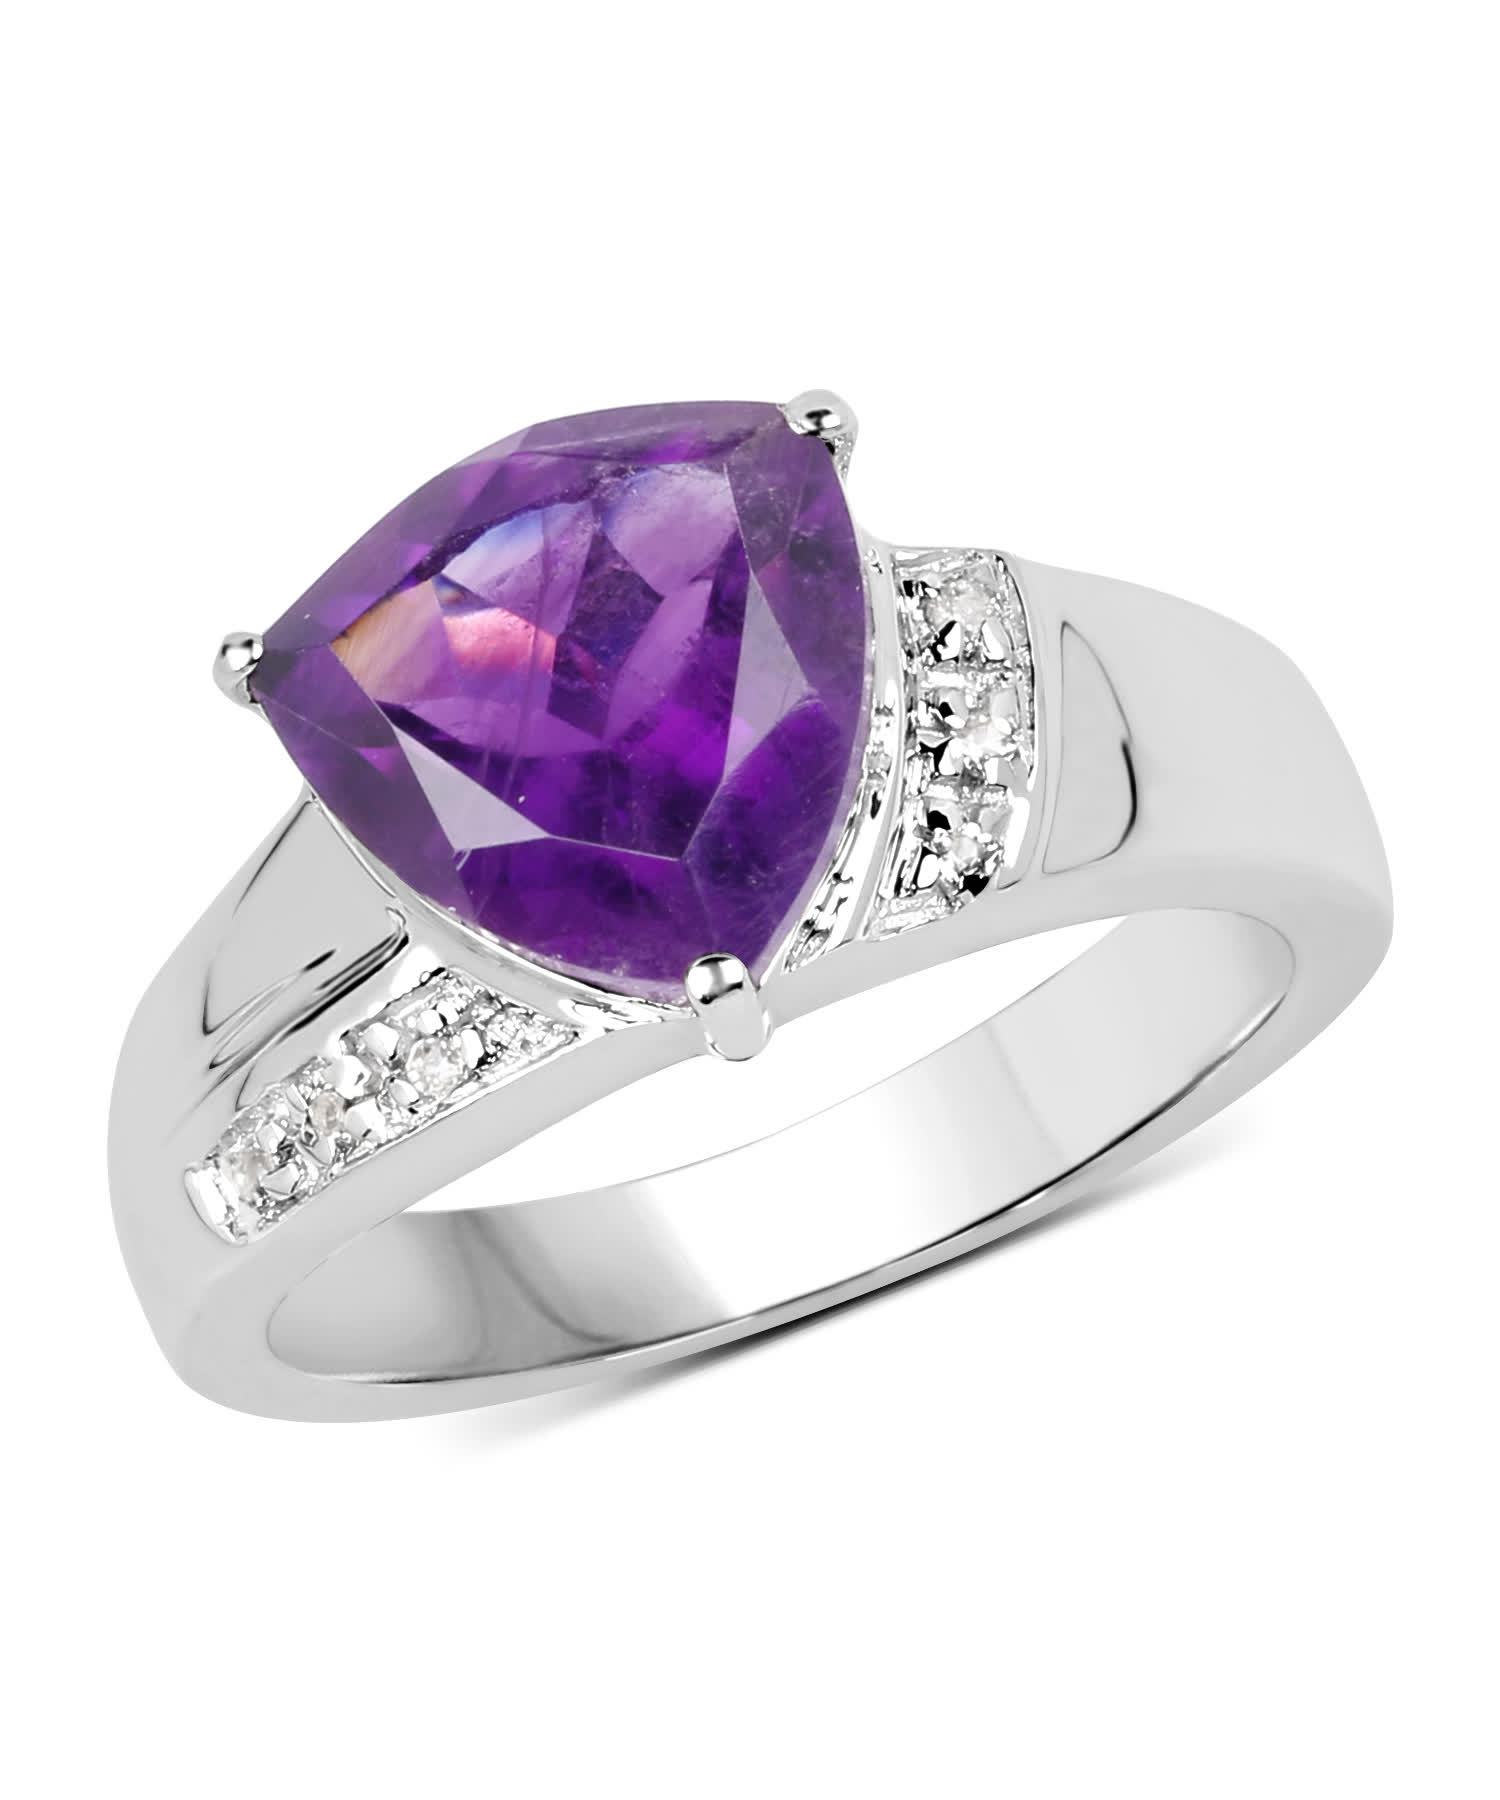 2.75ctw Natural Amethyst and Topaz Rhodium Plated 925 Sterling Silver Triangle Ring View 1